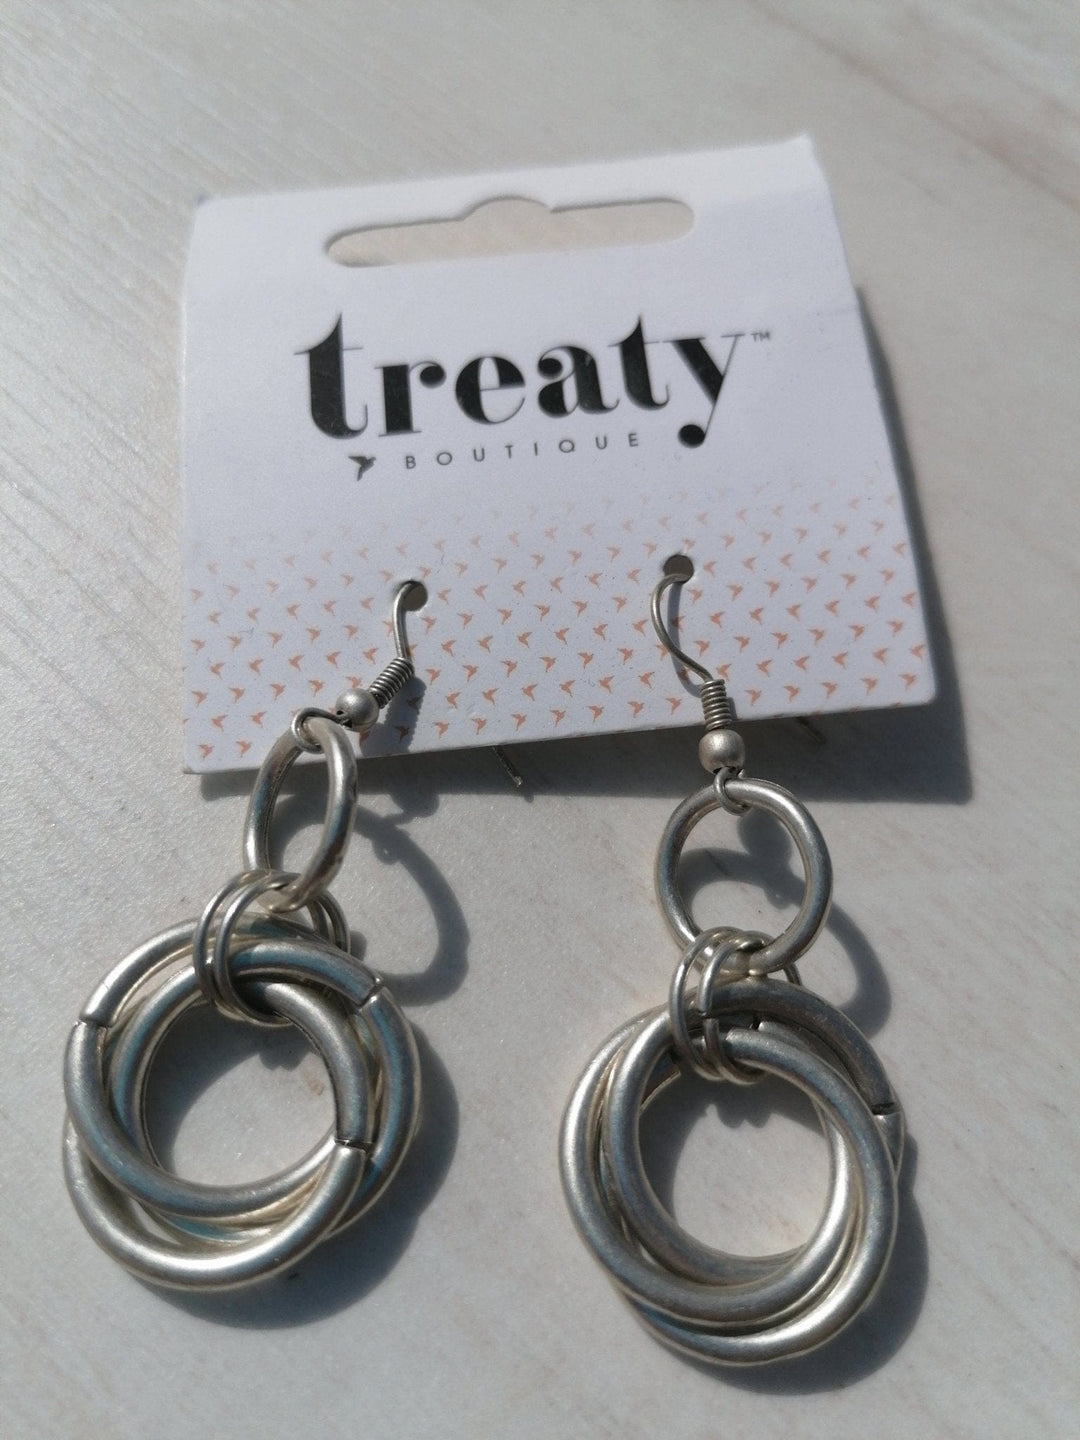 treaty riley earrings £12.99 now £9 - Crabtree Cottage